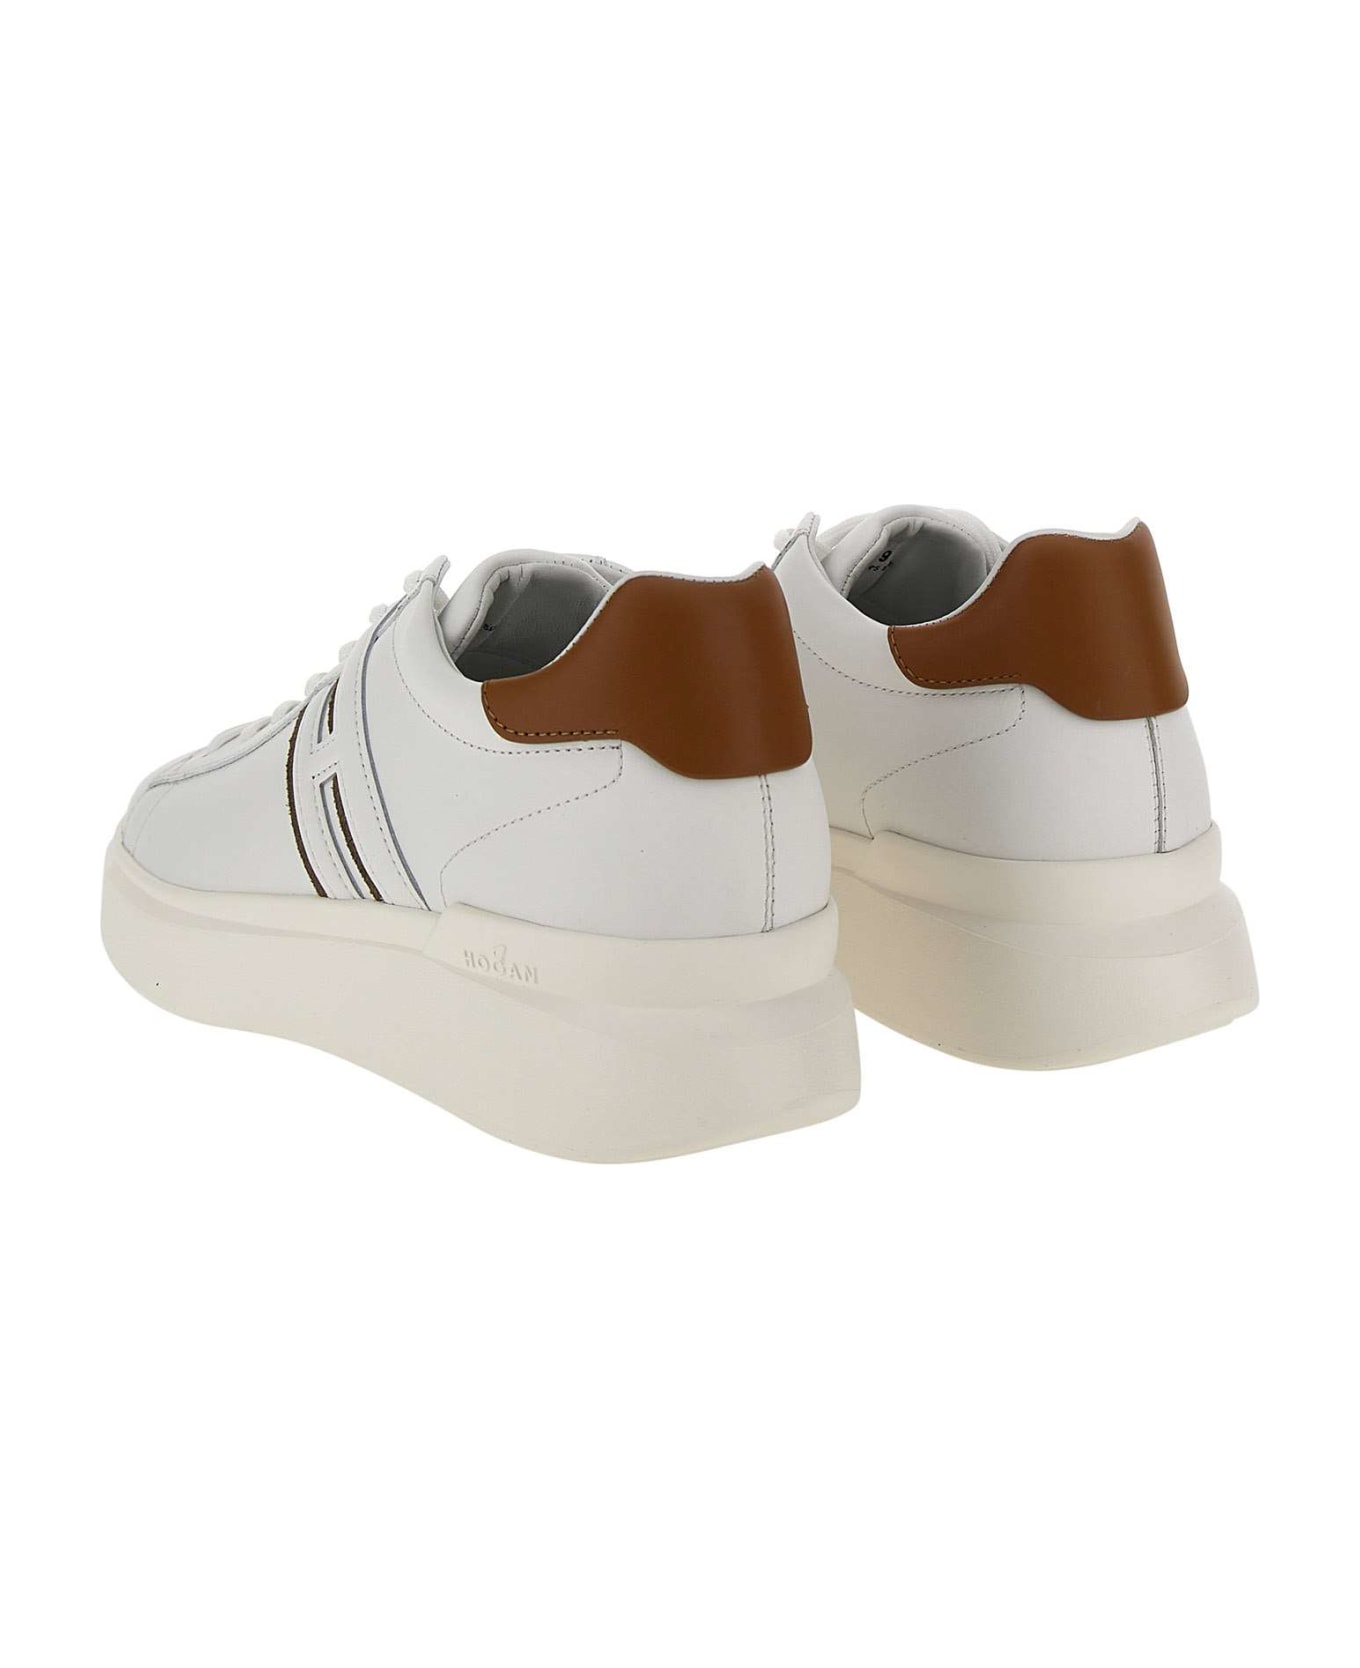 Hogan "h580" Leather Sneakers - WHITE